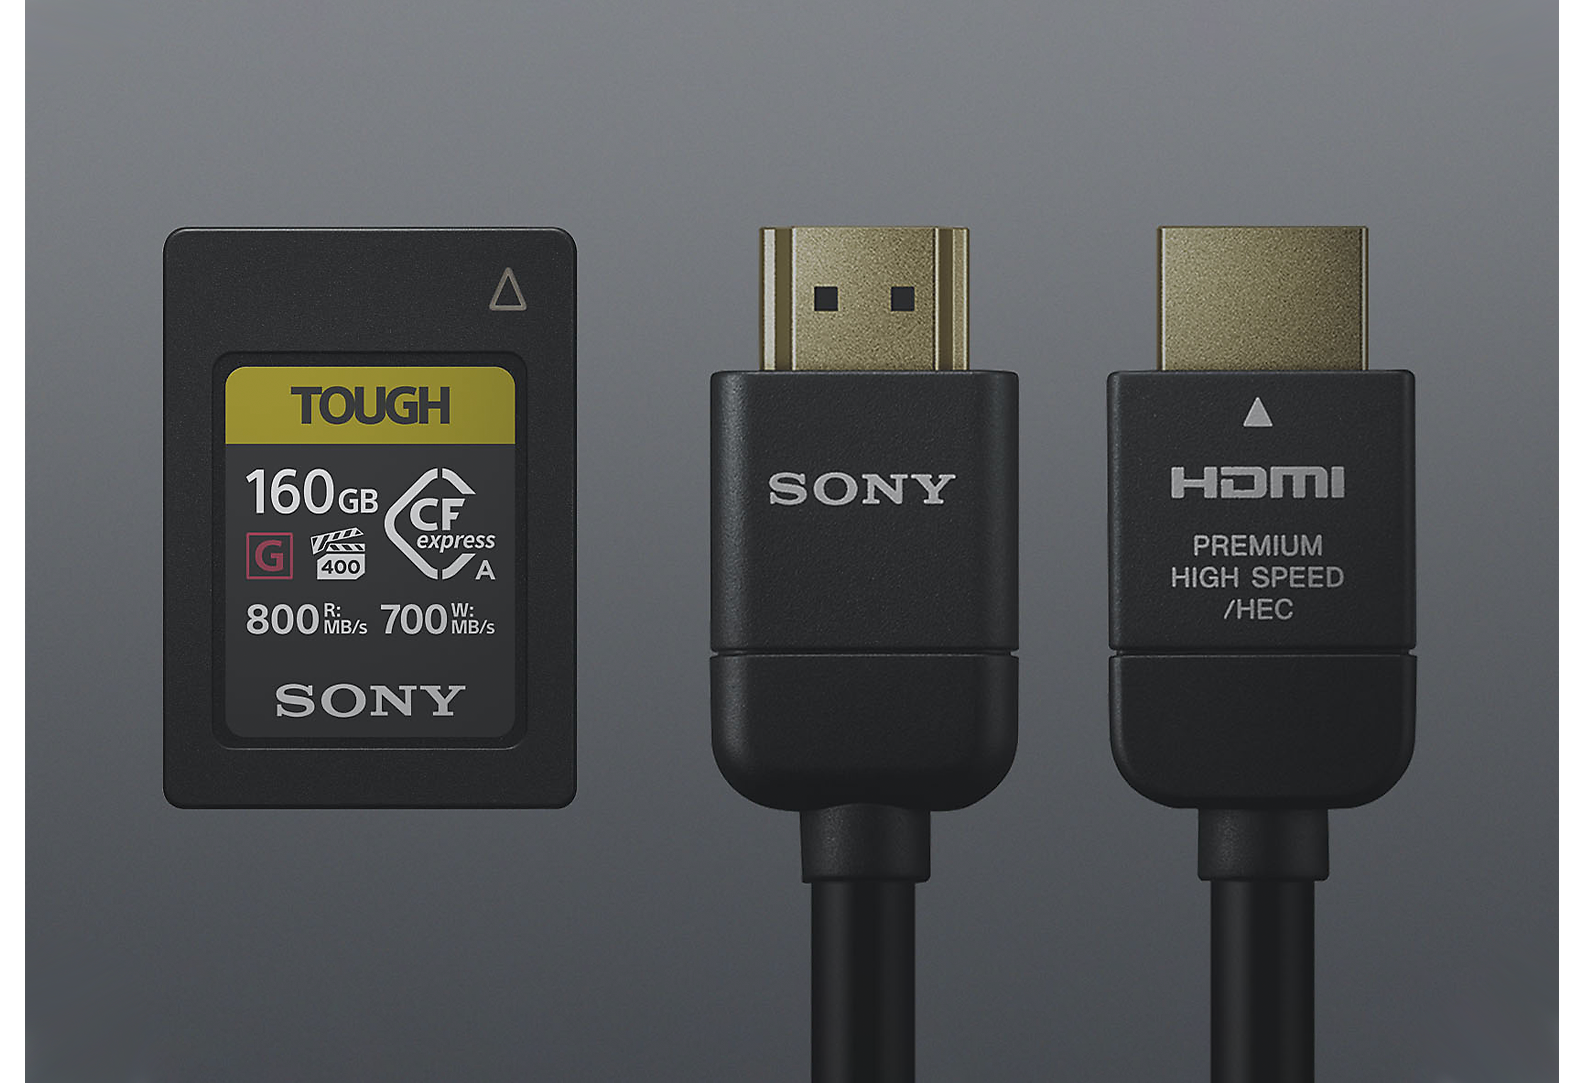 A Sony Tough SD card and two black Sony cables on a gray background